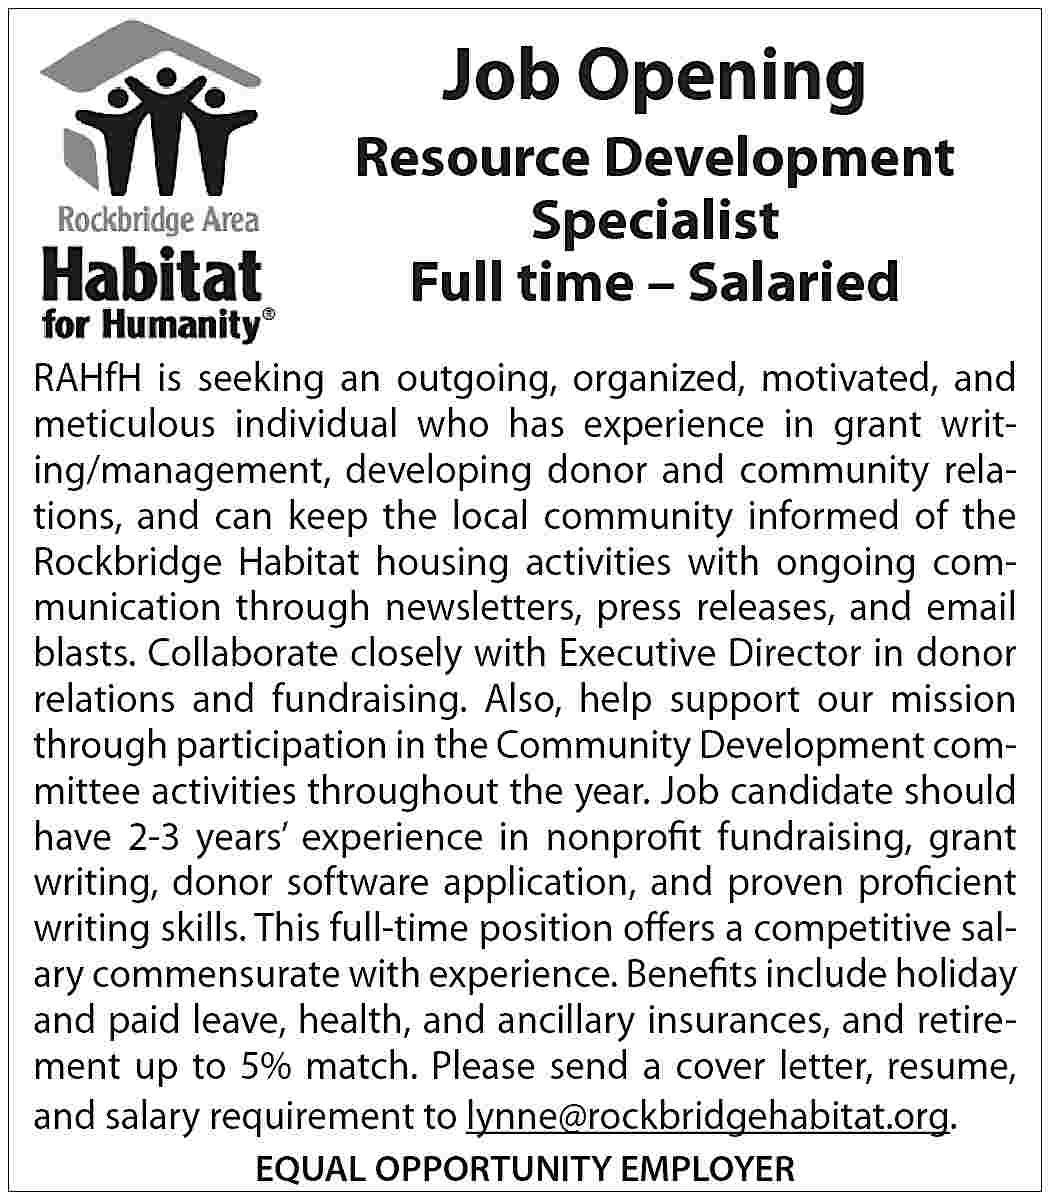 Job Opening Resource Development Specialist  Job Opening Resource Development Specialist Full time – Salaried RAHfH is seeking an outgoing, organized, motivated, and meticulous individual who has experience in grant writing/management, developing donor and community relations, and can keep the local community informed of the Rockbridge Habitat housing activities with ongoing communication through newsletters, press releases, and email blasts. Collaborate closely with Executive Director in donor relations and fundraising. Also, help support our mission through participation in the Community Development committee activities throughout the year. Job candidate should have 2-3 years’ experience in nonprofit fundraising, grant writing, donor software application, and proven proficient writing skills. This full-time position offers a competitive salary commensurate with experience. Benefits include holiday and paid leave, health, and ancillary insurances, and retirement up to 5% match. Please send a cover letter, resume, and salary requirement to lynne@rockbridgehabitat.org. EQUAL OPPORTUNITY EMPLOYER